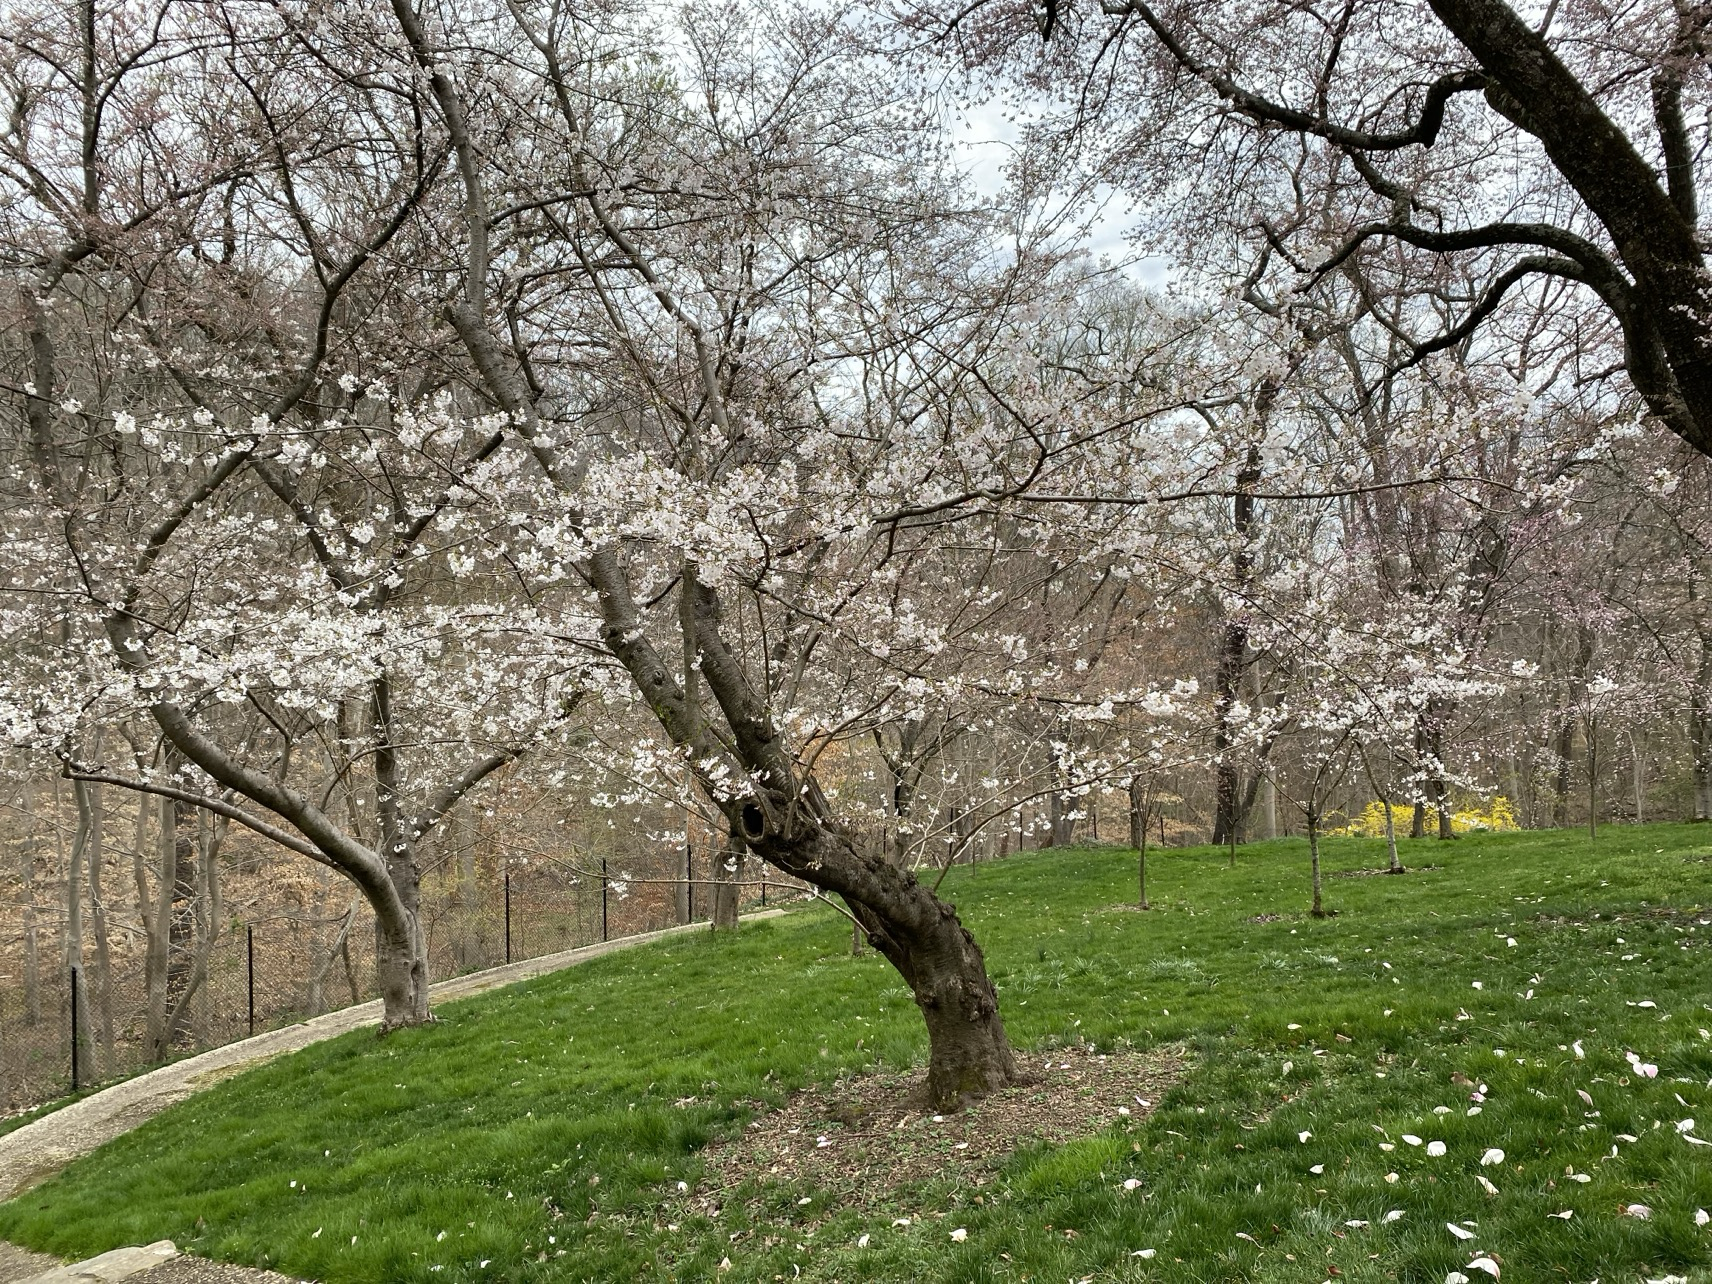 Cherry blossoms are beginning to bloom at Dumbarton Oaks. Photo courtesy of Dumbarton Oaks.